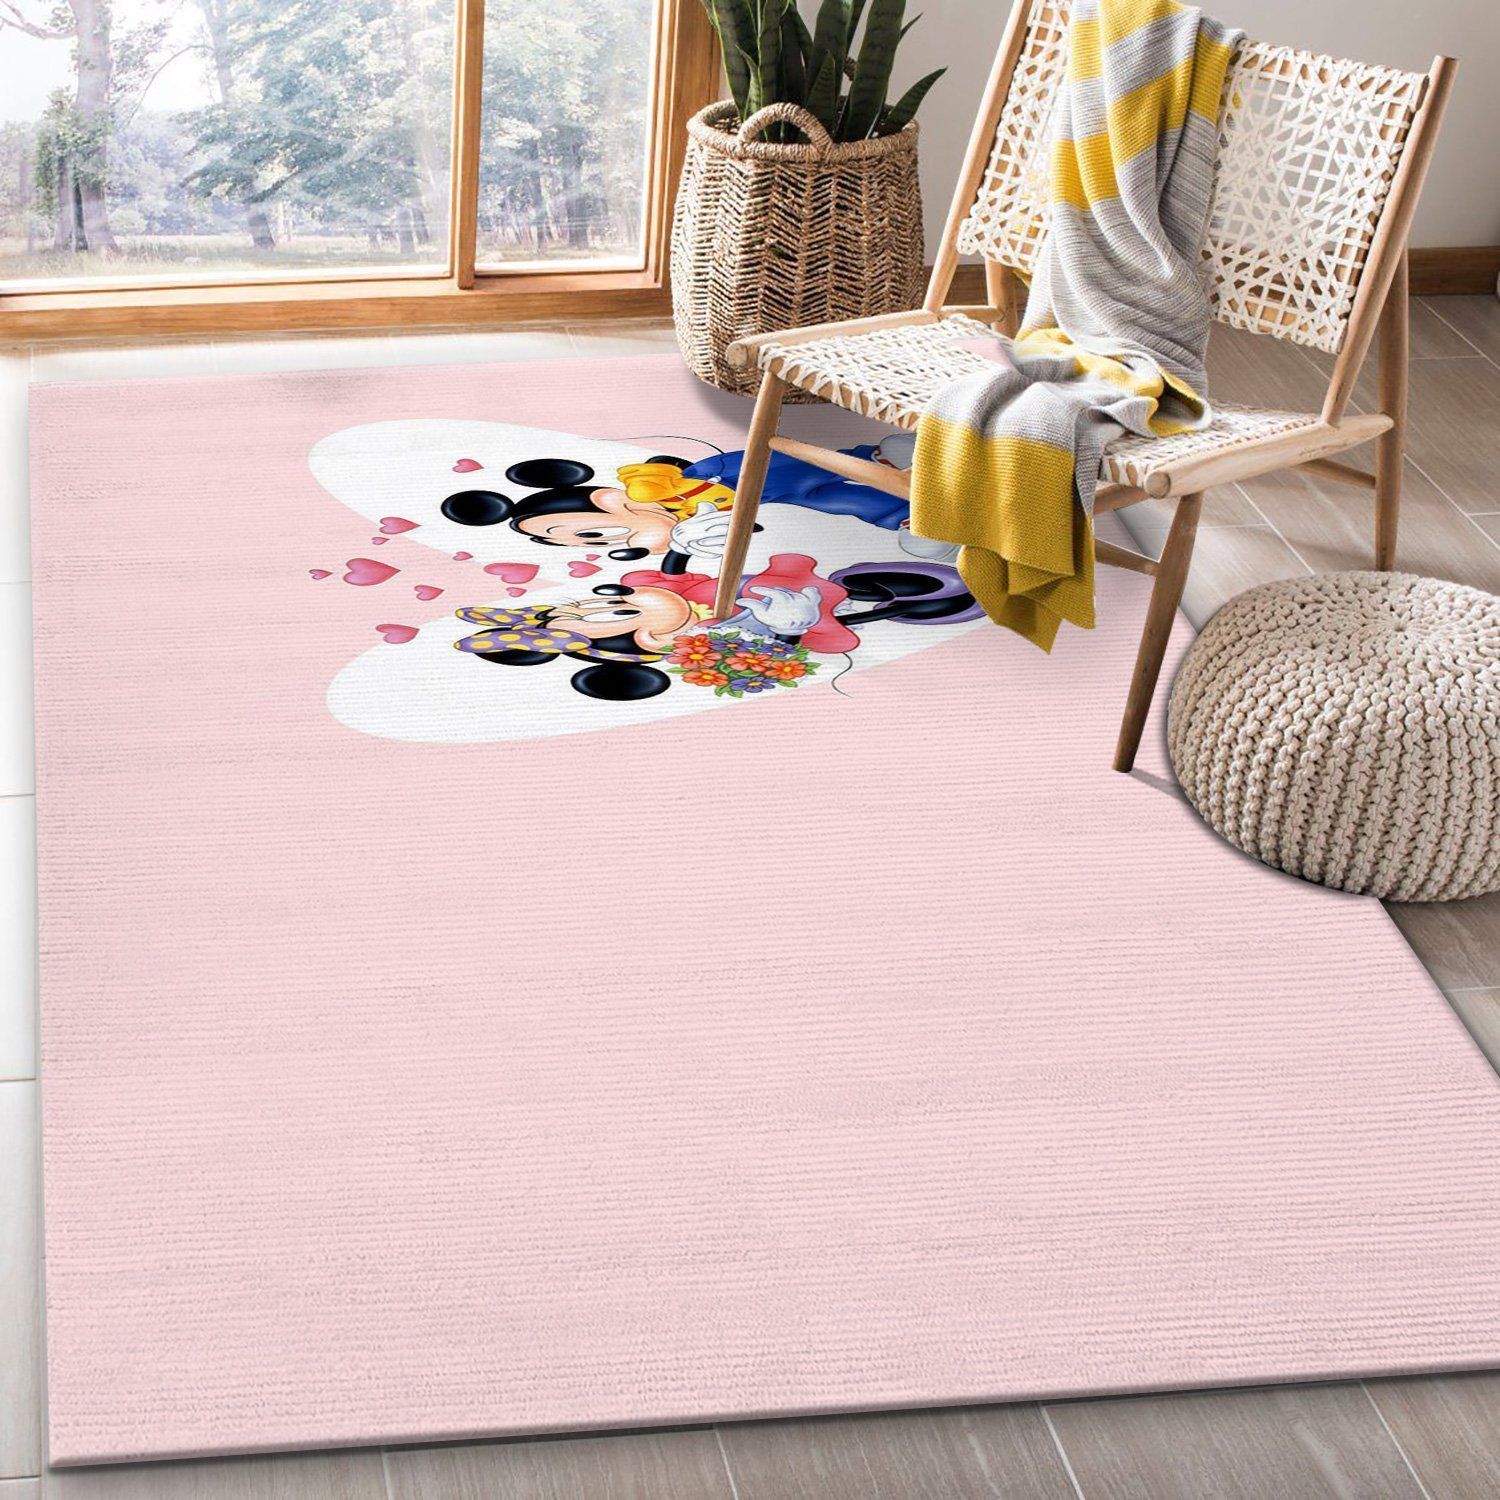 Minnie Mouse Ver14 Movie Area Rug Bedroom Rug Home US Decor - Indoor Outdoor Rugs